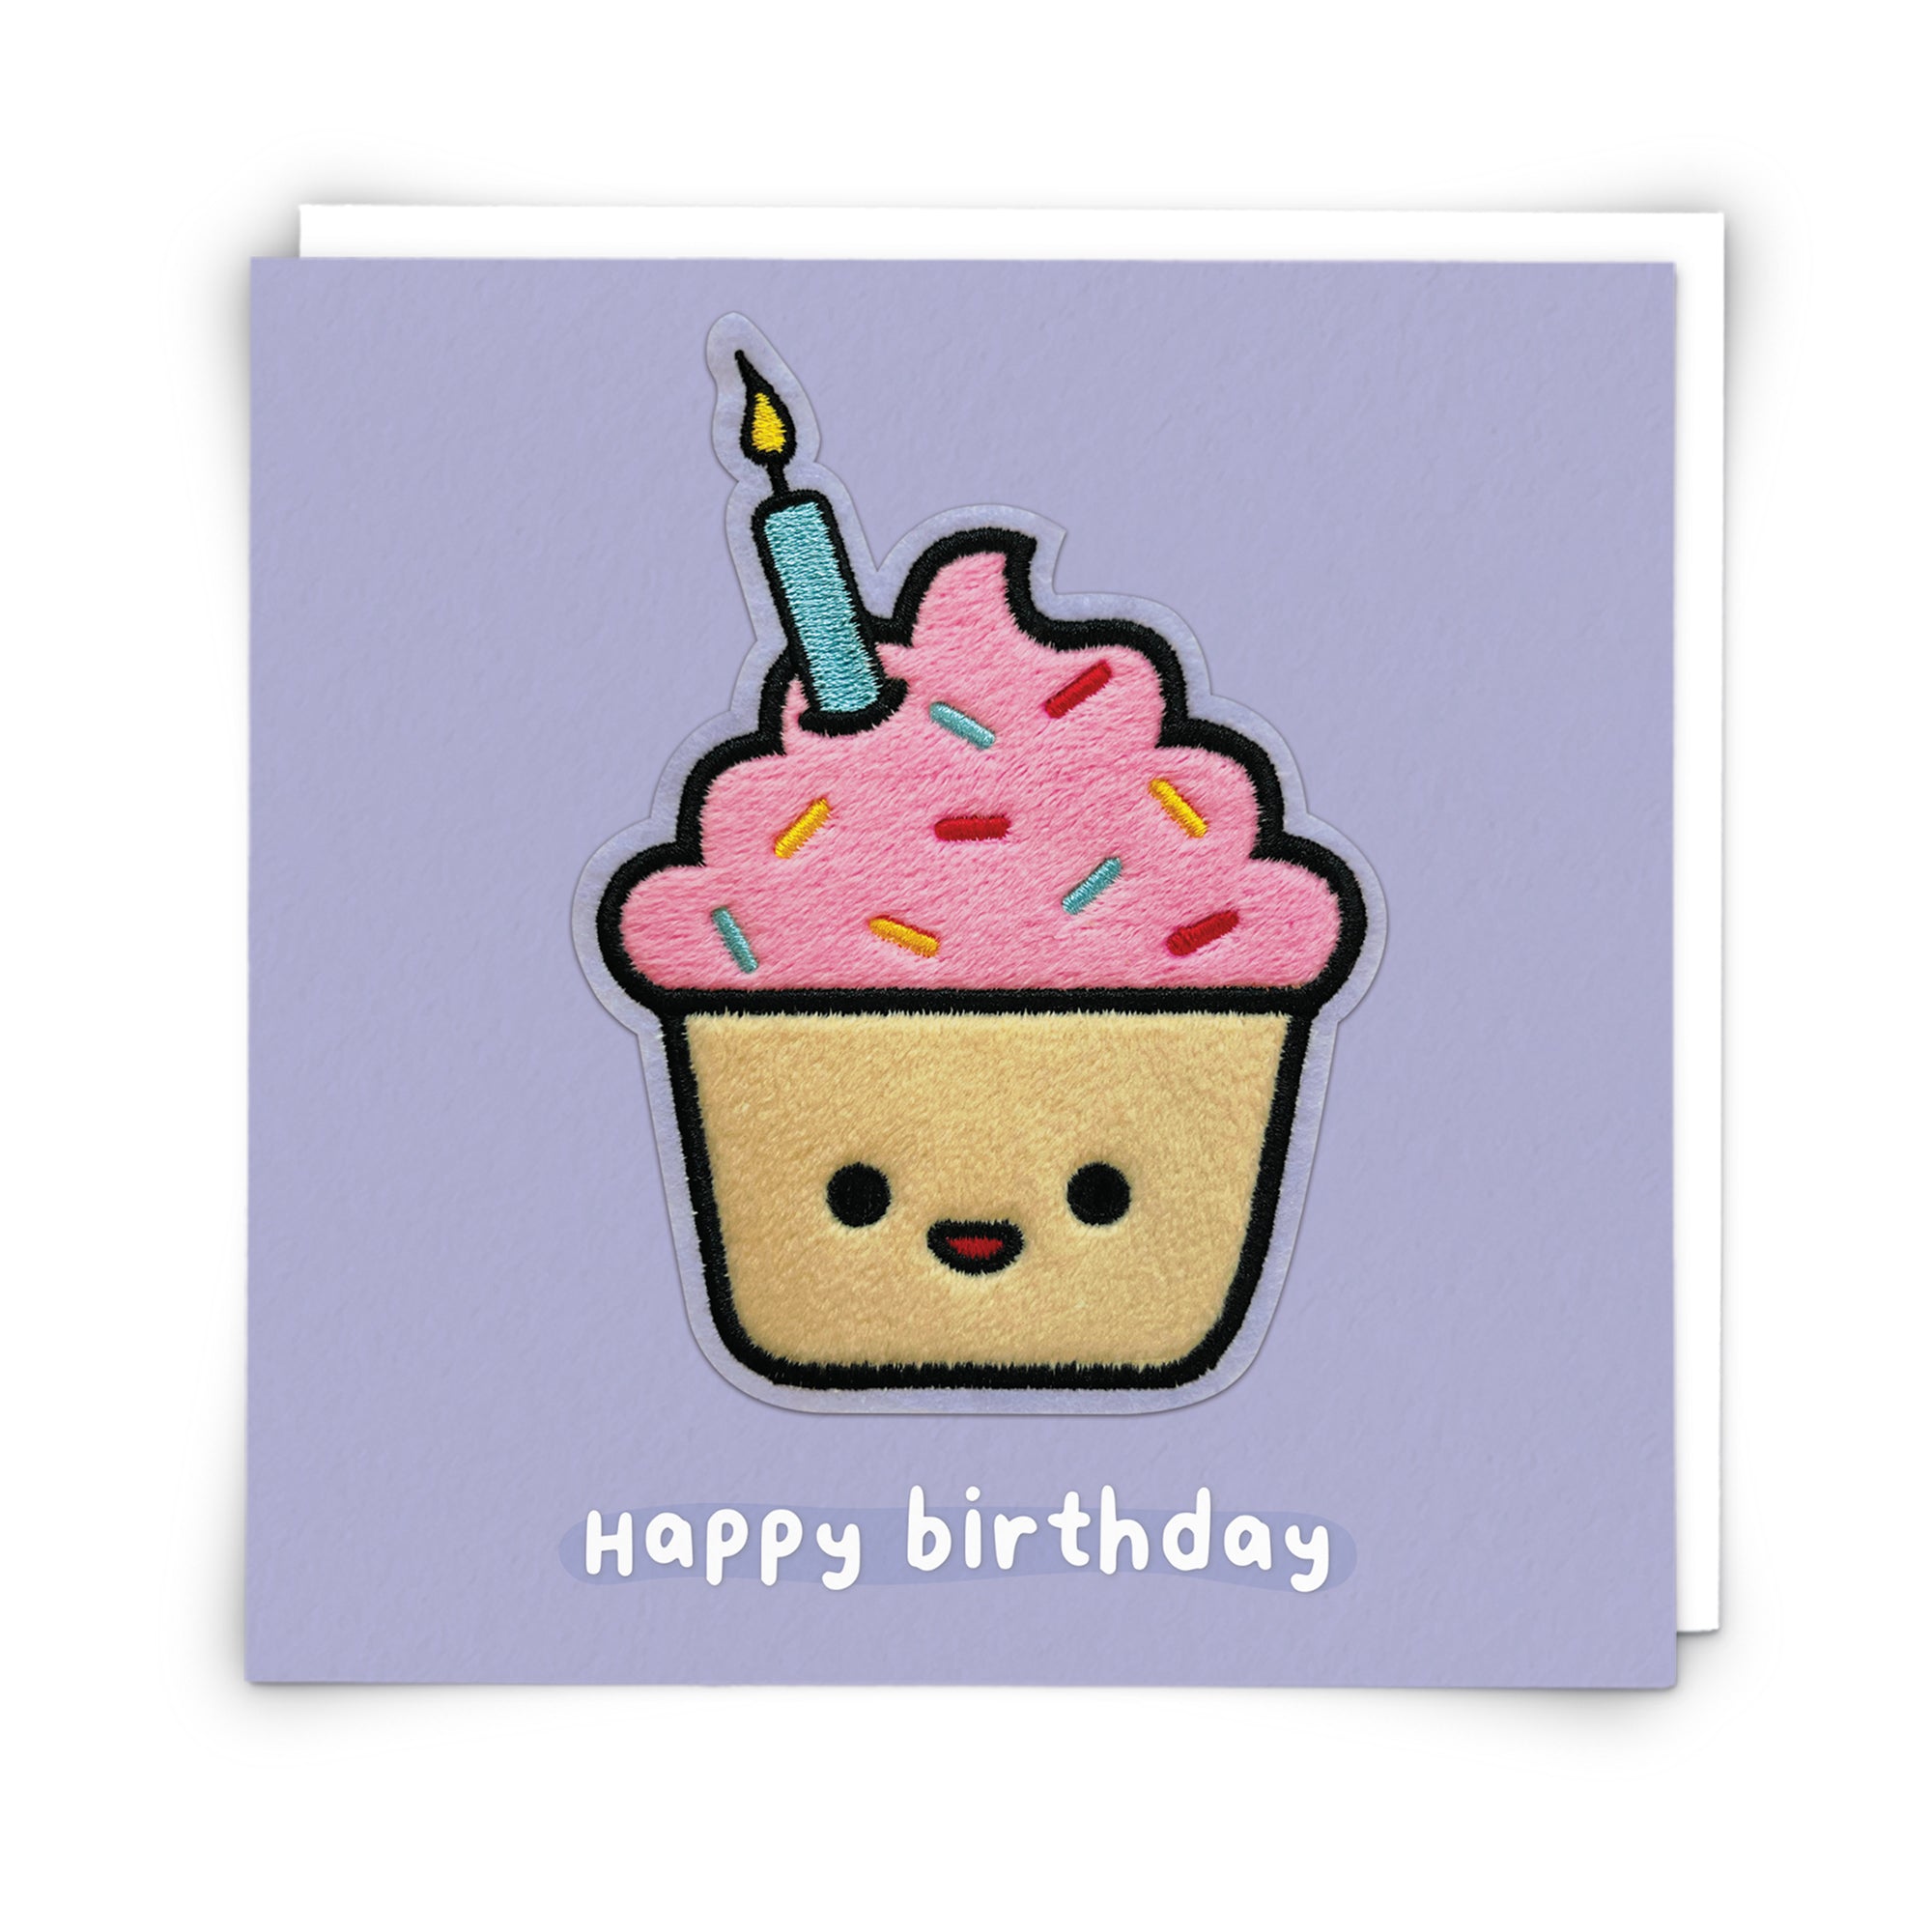 Kawaii Cupcake Embroidered Patch Birthday Card from Penny Black